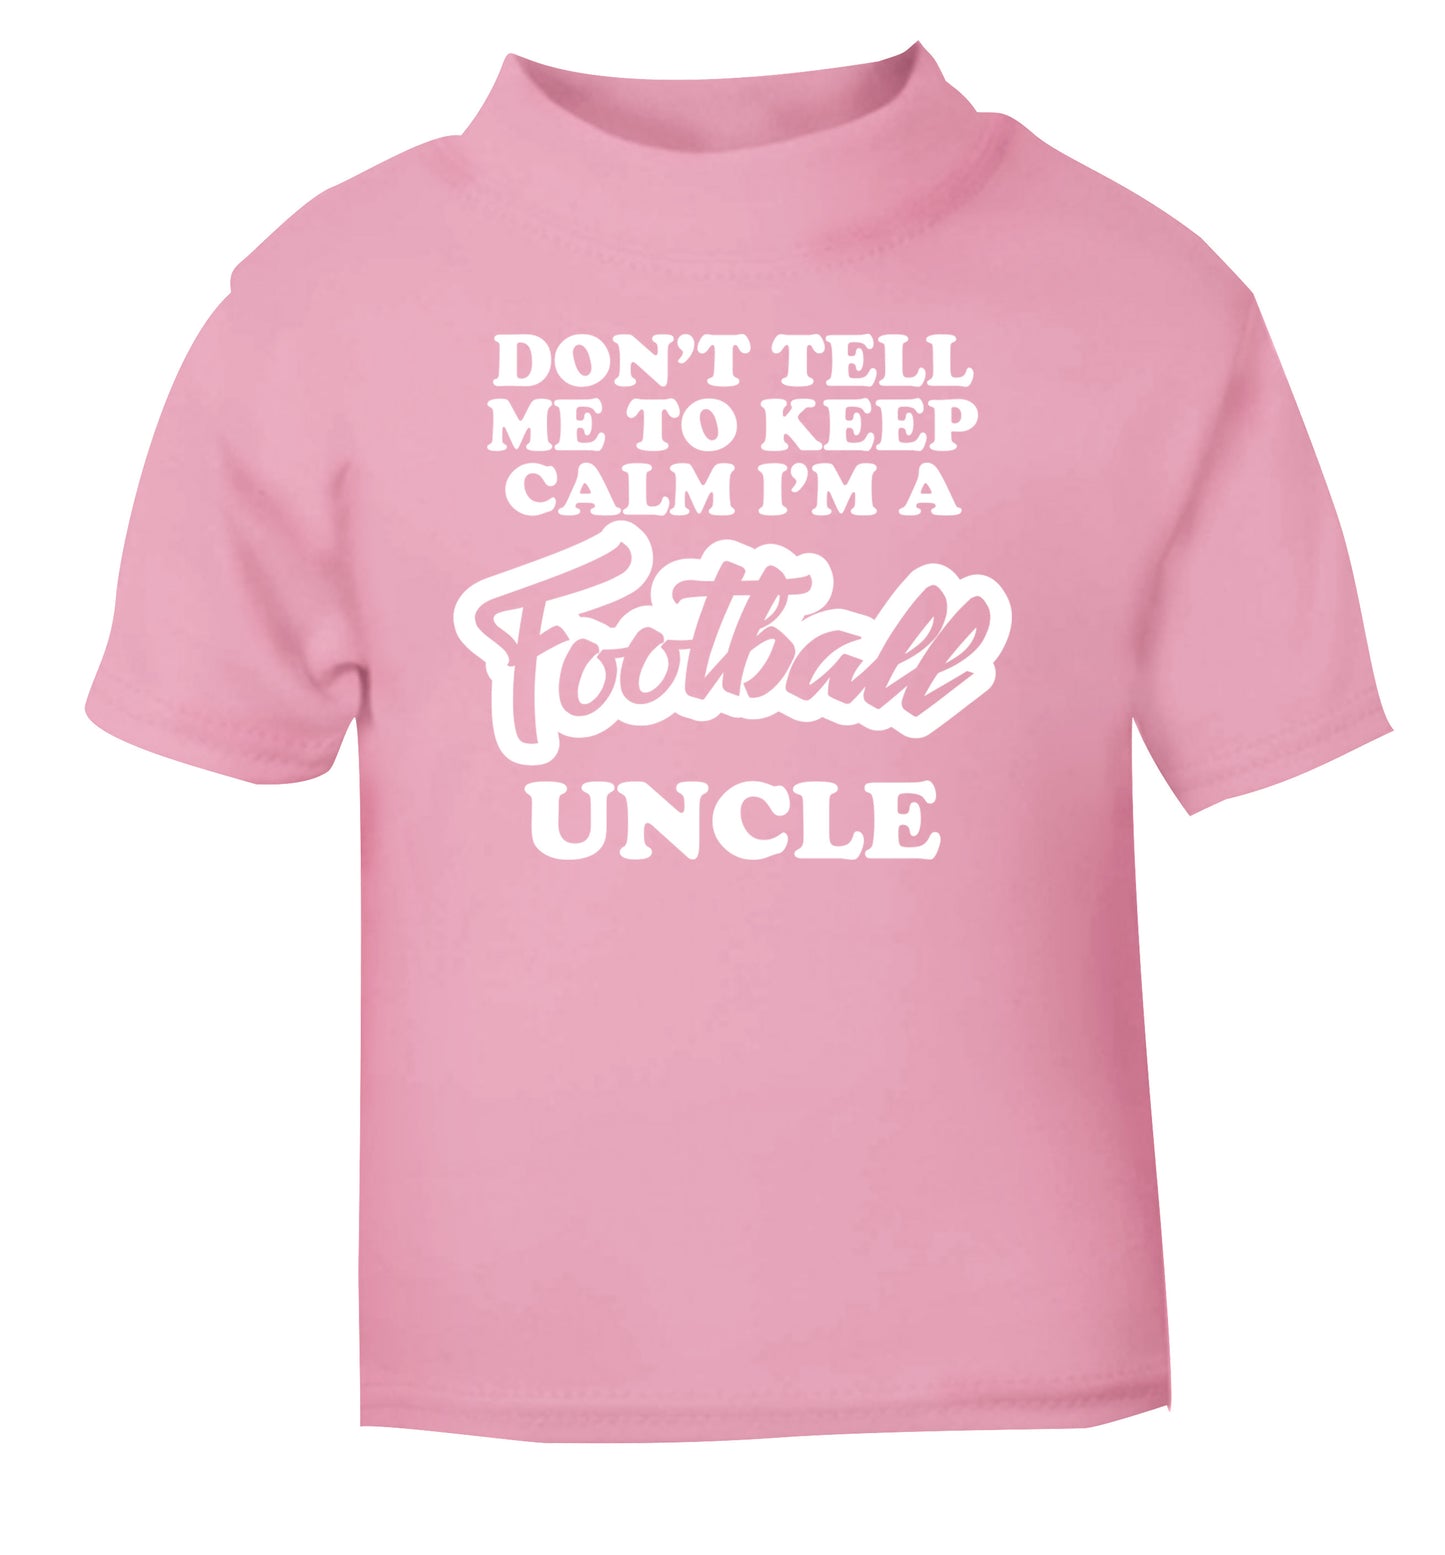 Worlds most amazing football uncle light pink Baby Toddler Tshirt 2 Years